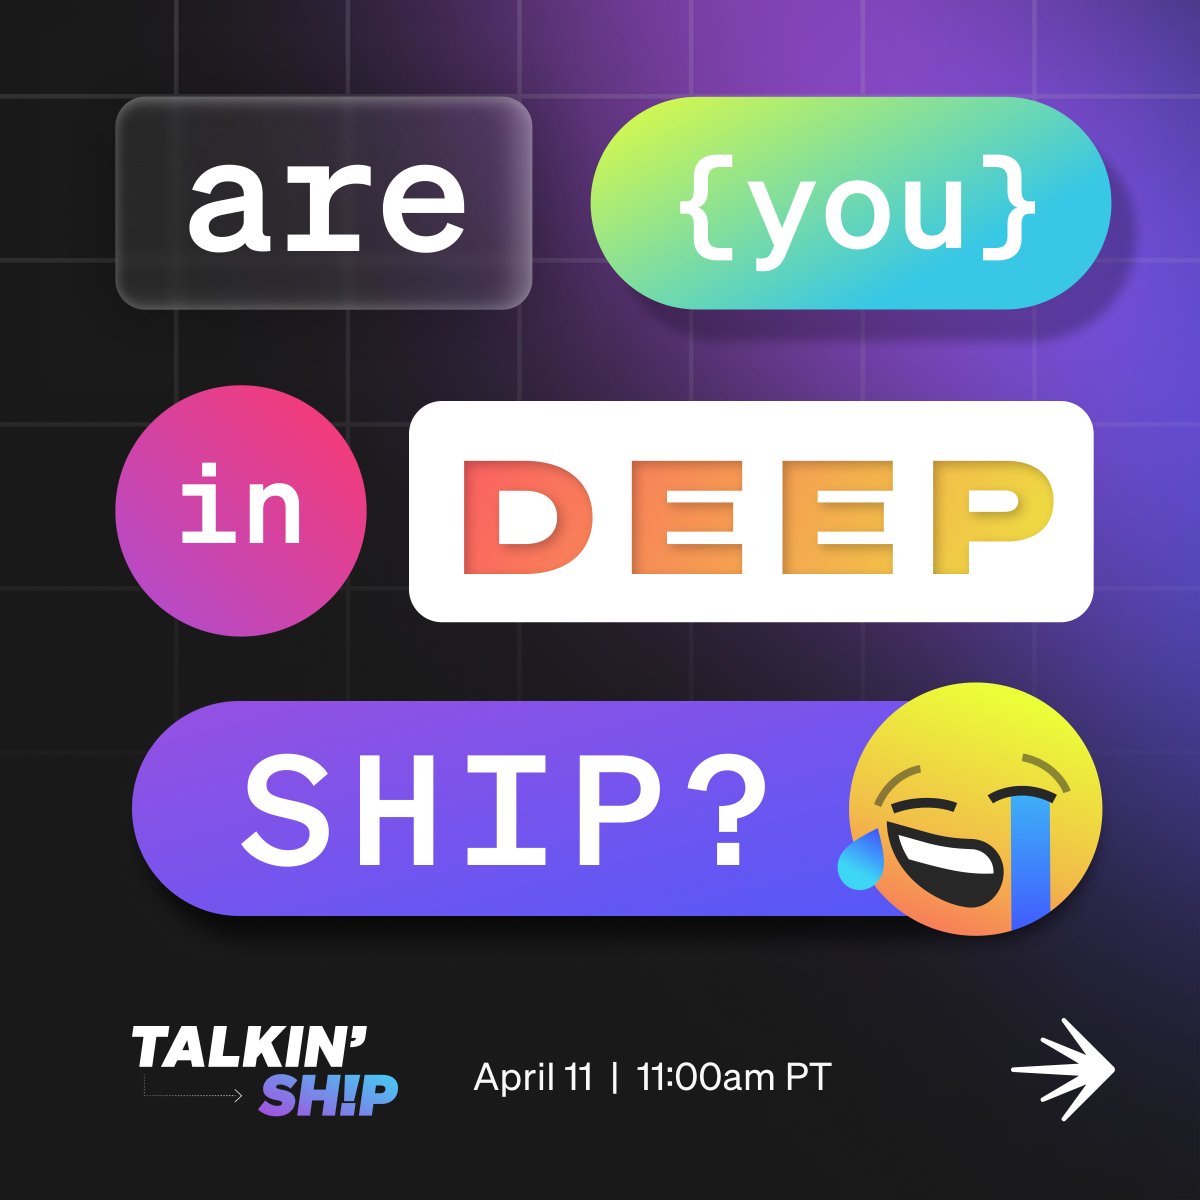 No recordings, just live code. Our virtual Talkin Ship workshops are immersive, hands-on dev experiences. It's not too late to register for tomorrow's workshop to try your hand at using feature flags! launchdarkly.com/talkin-ship/